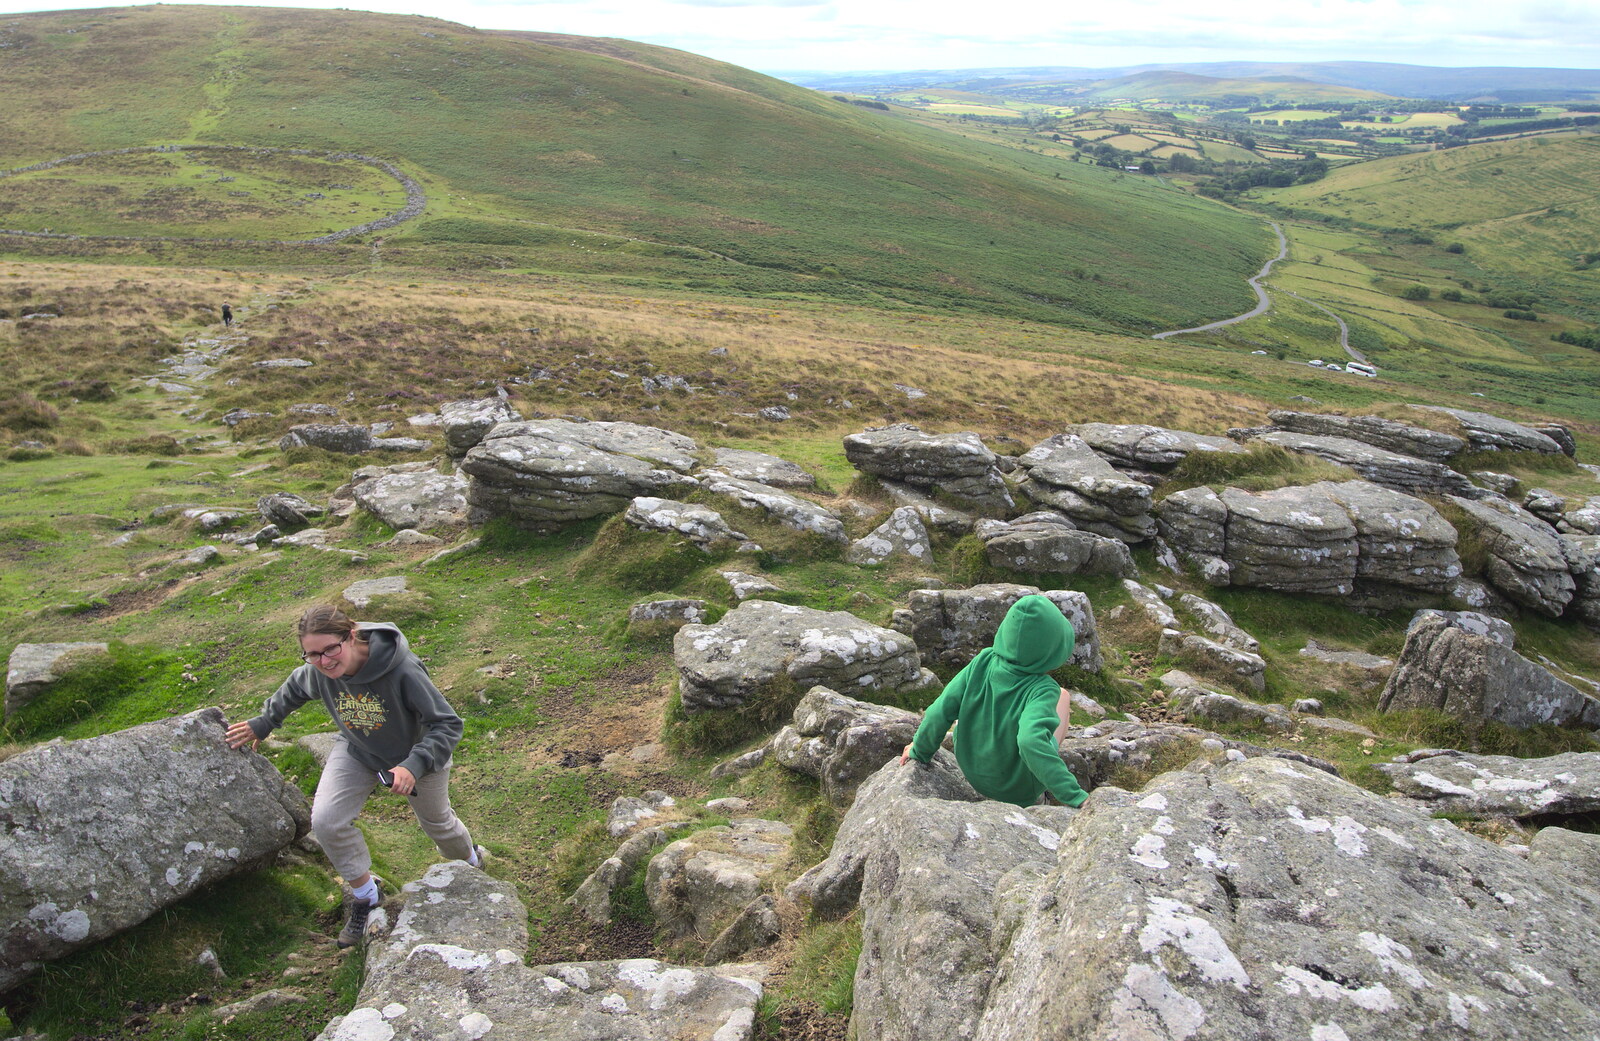 We're on the tor from Badger's Holt and Bronze-Age Grimspound, Dartmoor, Devon - 10th August 2016